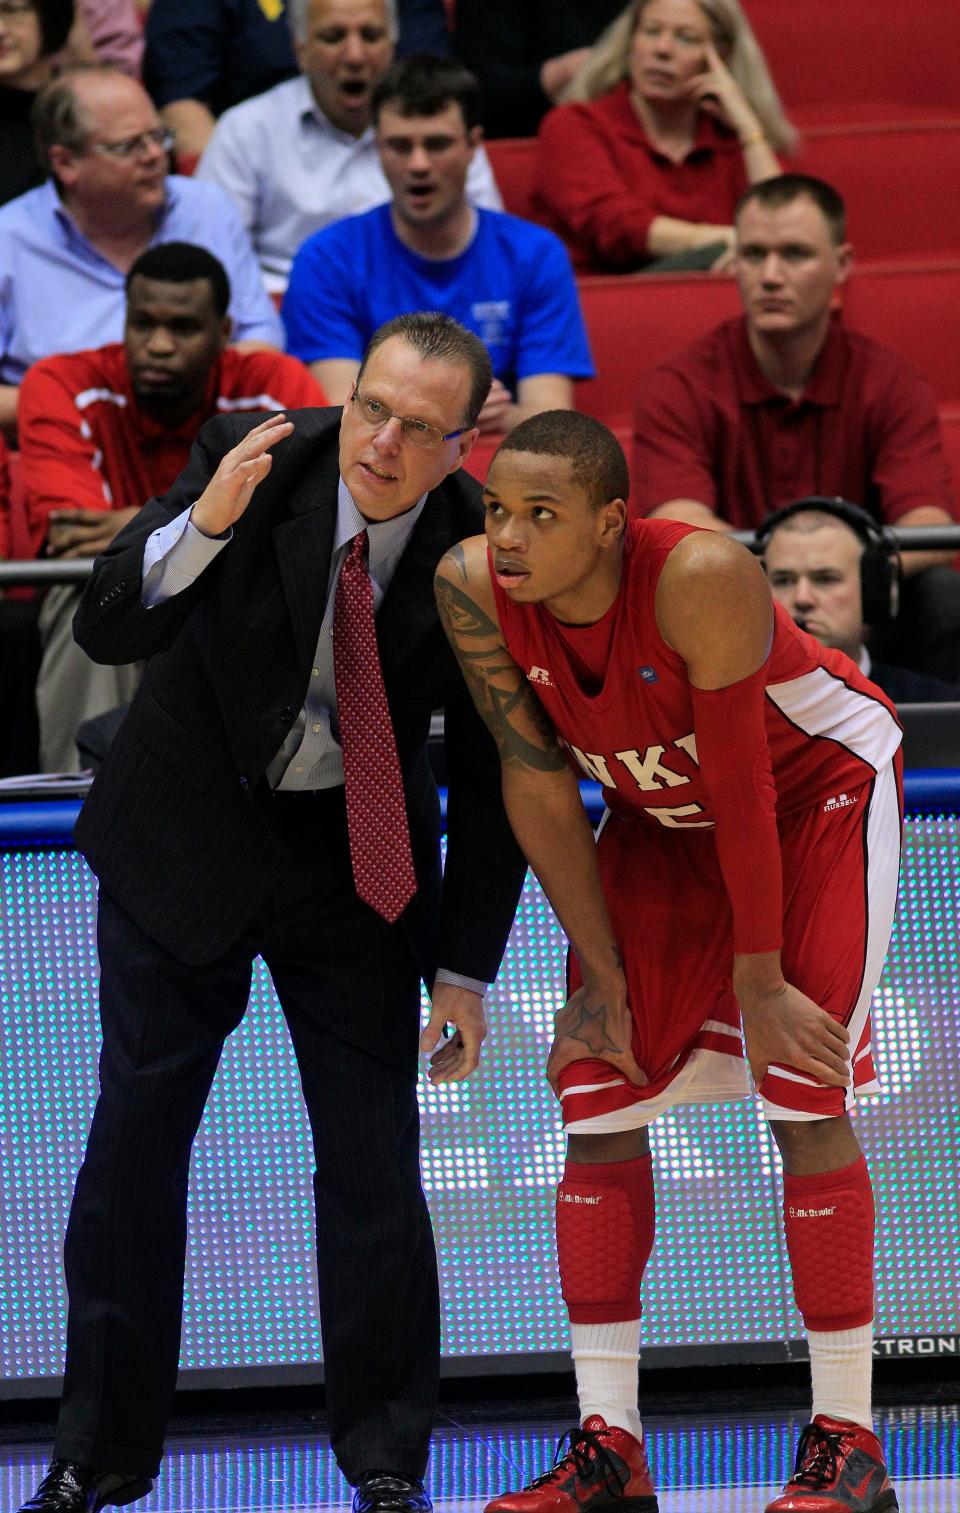 Western Kentucky head coach Ray Harper talks with guard Derrick Gordon (5) during the opening game of the NCAA college basketball tournament  against Mississippi Valley State, Tuesday, March 13, 2012, in Dayton, Ohio. (AP Photo/Al Behrman)